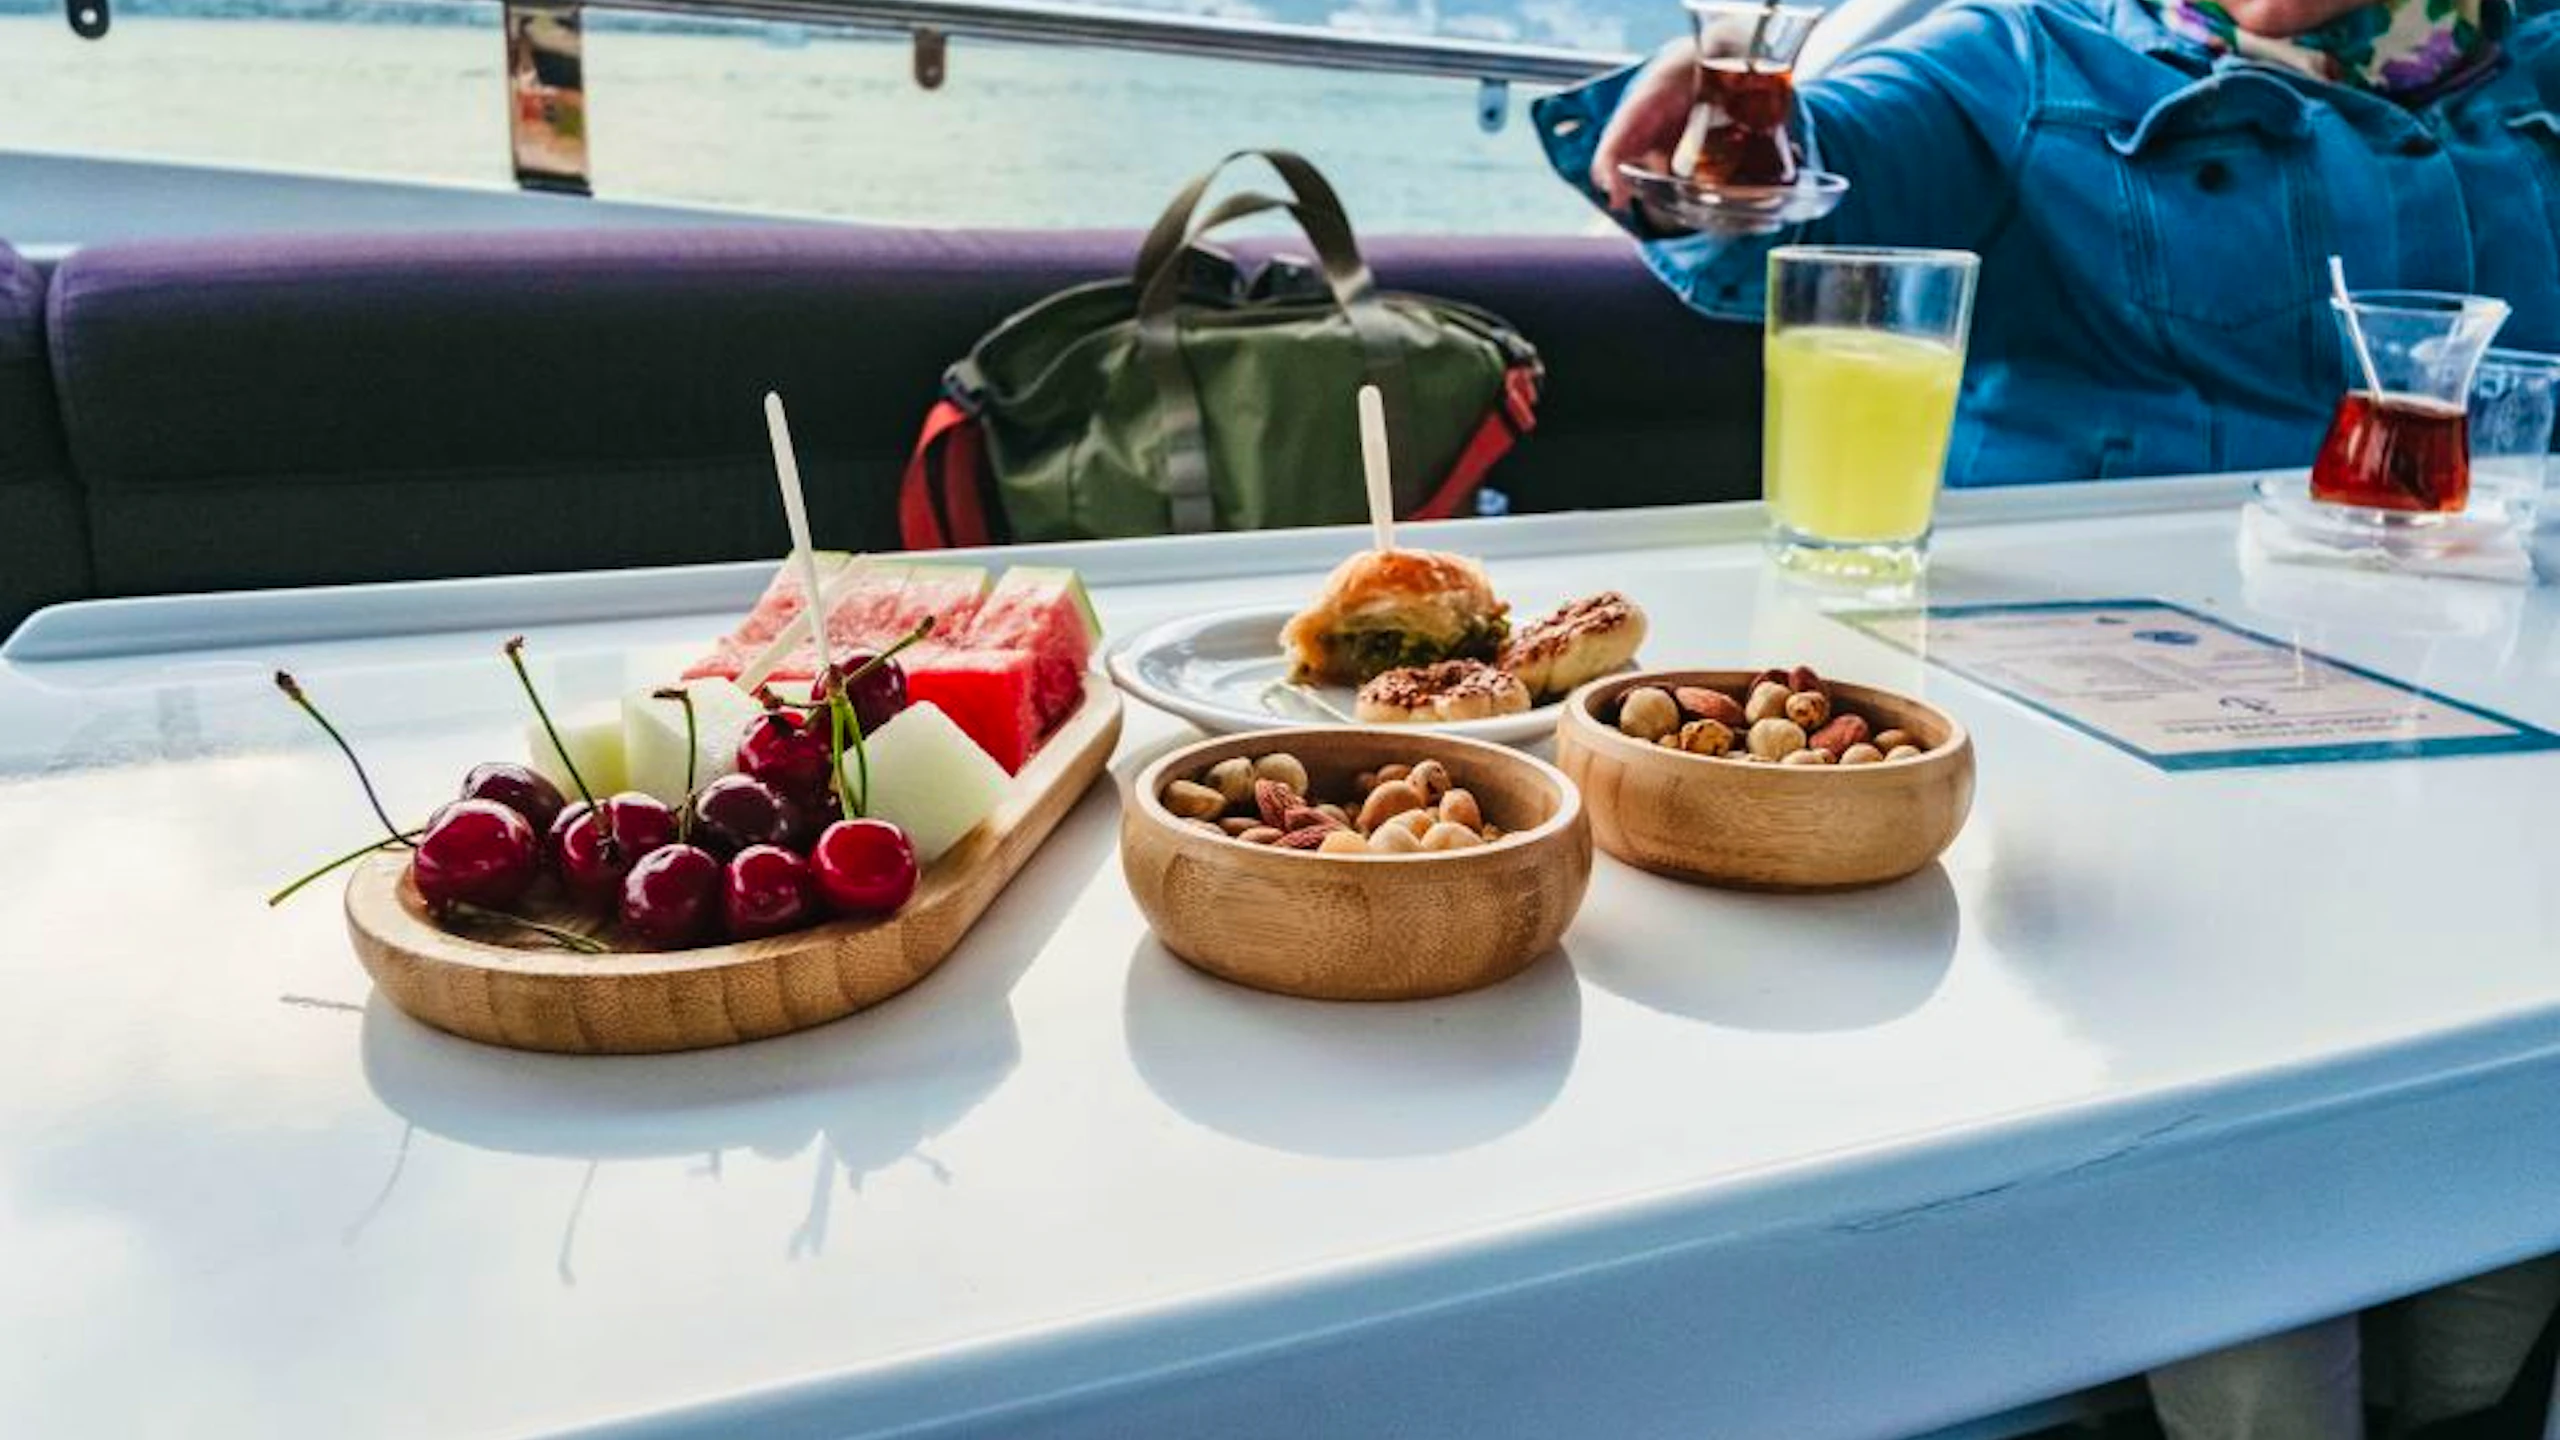 Bosphorus Yacht Tour with Drinks and Snacks: Istanbul